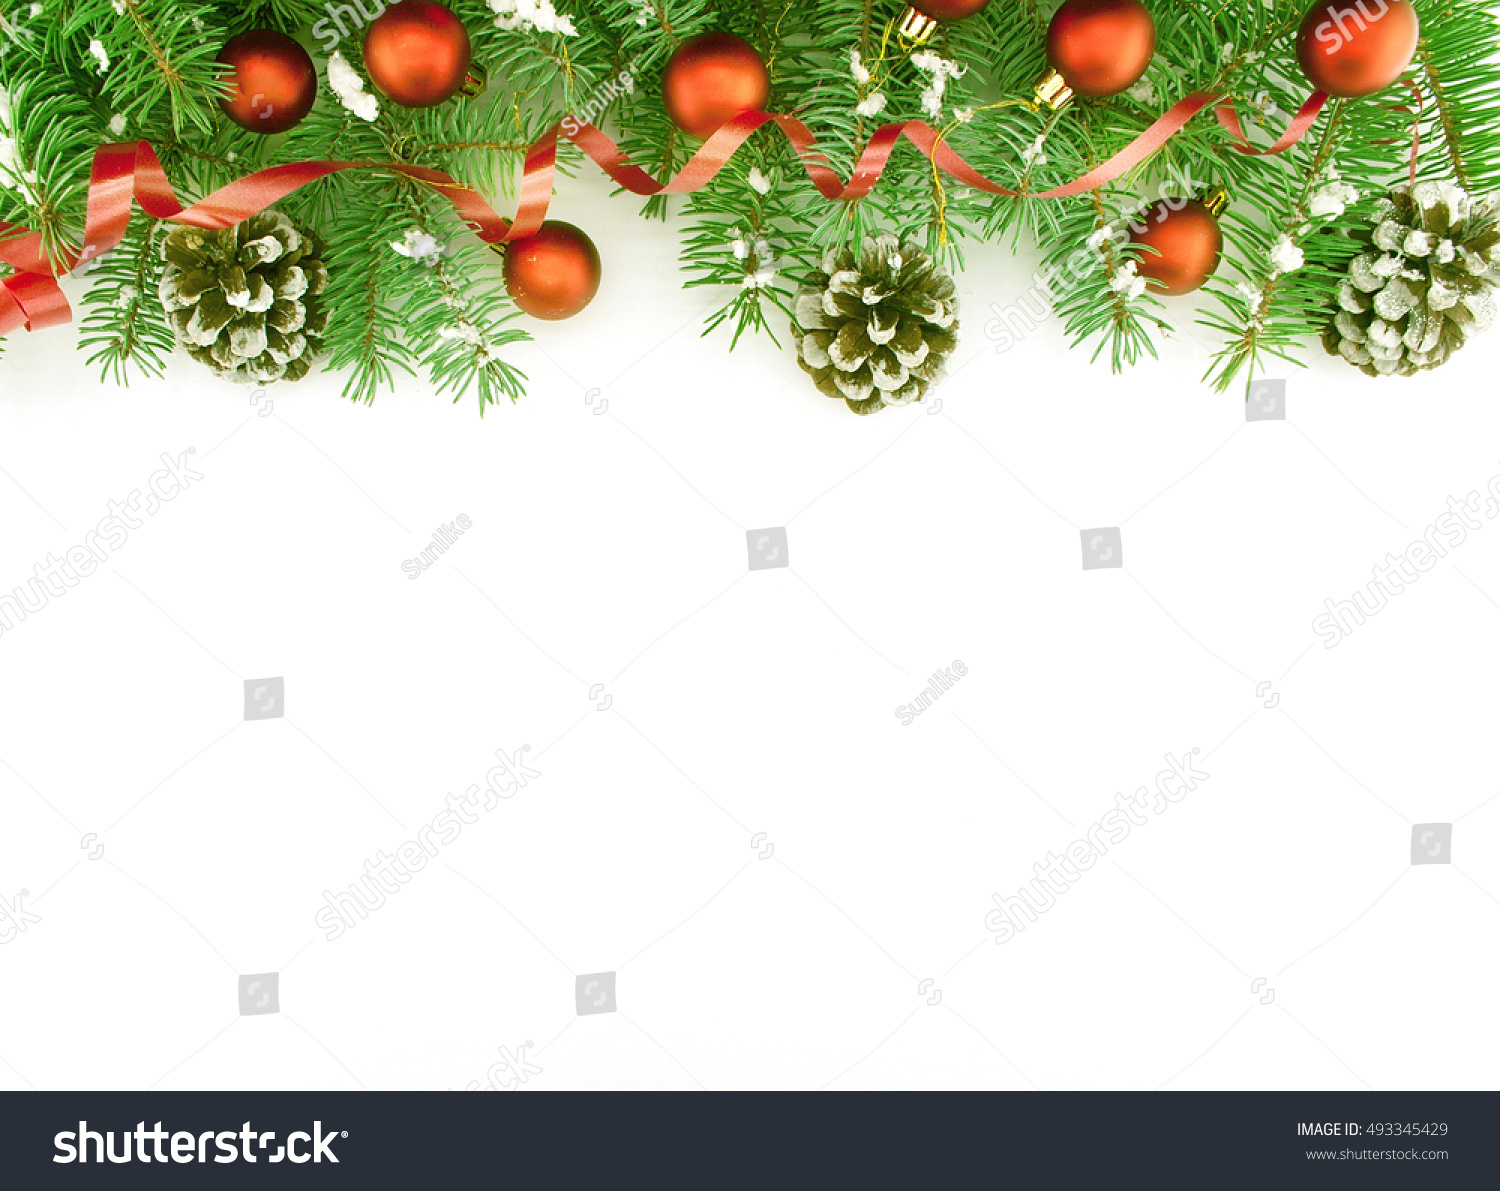 Frame of Christmas tree branches with Christmas decoration: red baubles, ribbon, pinecone and snowflakes isolated on white. Holiday background. Top view #493345429